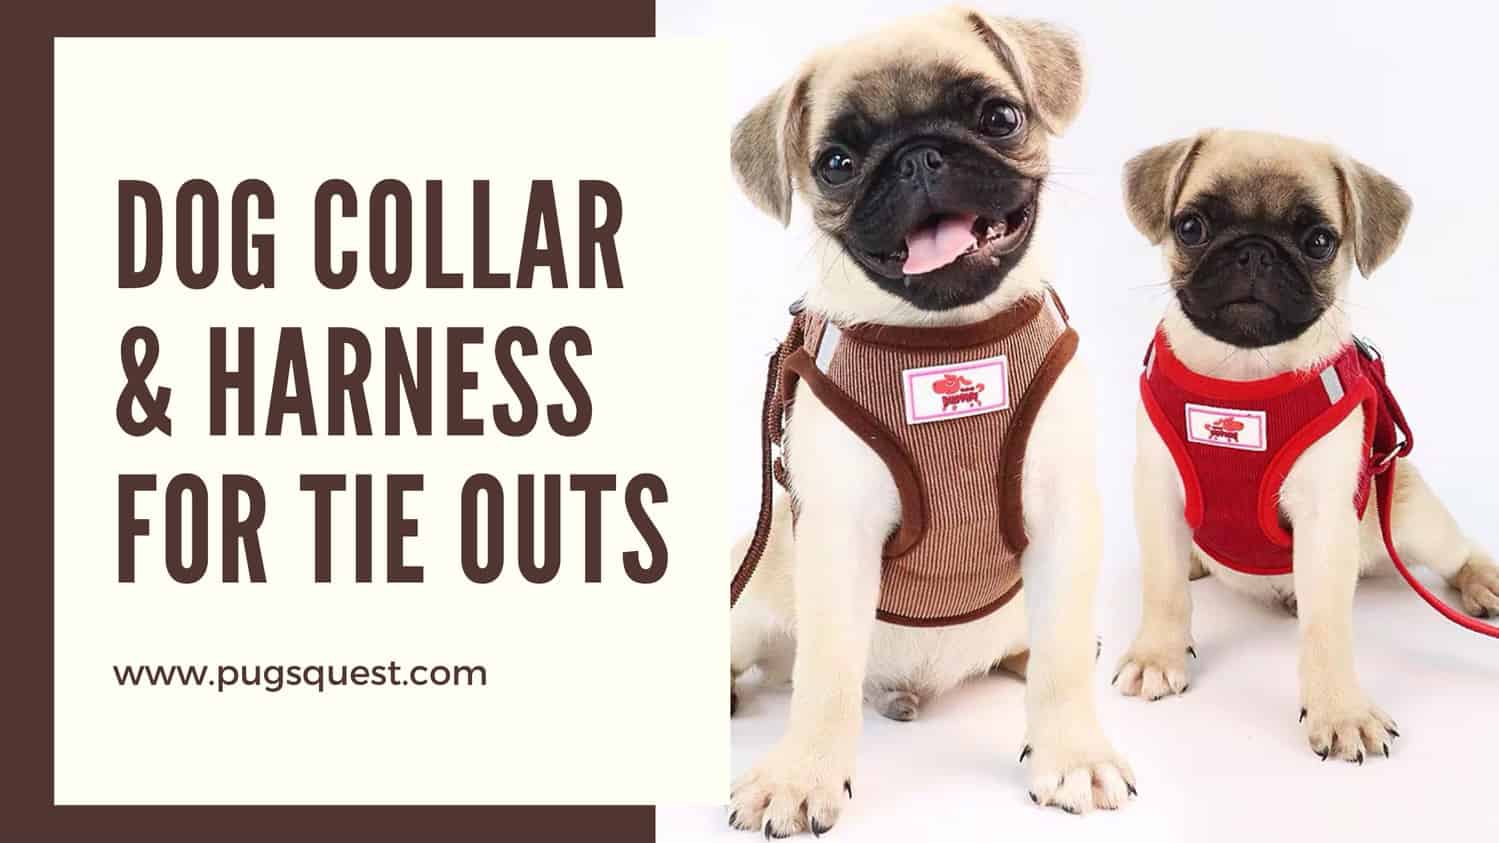 dog collar & harness for tie outs